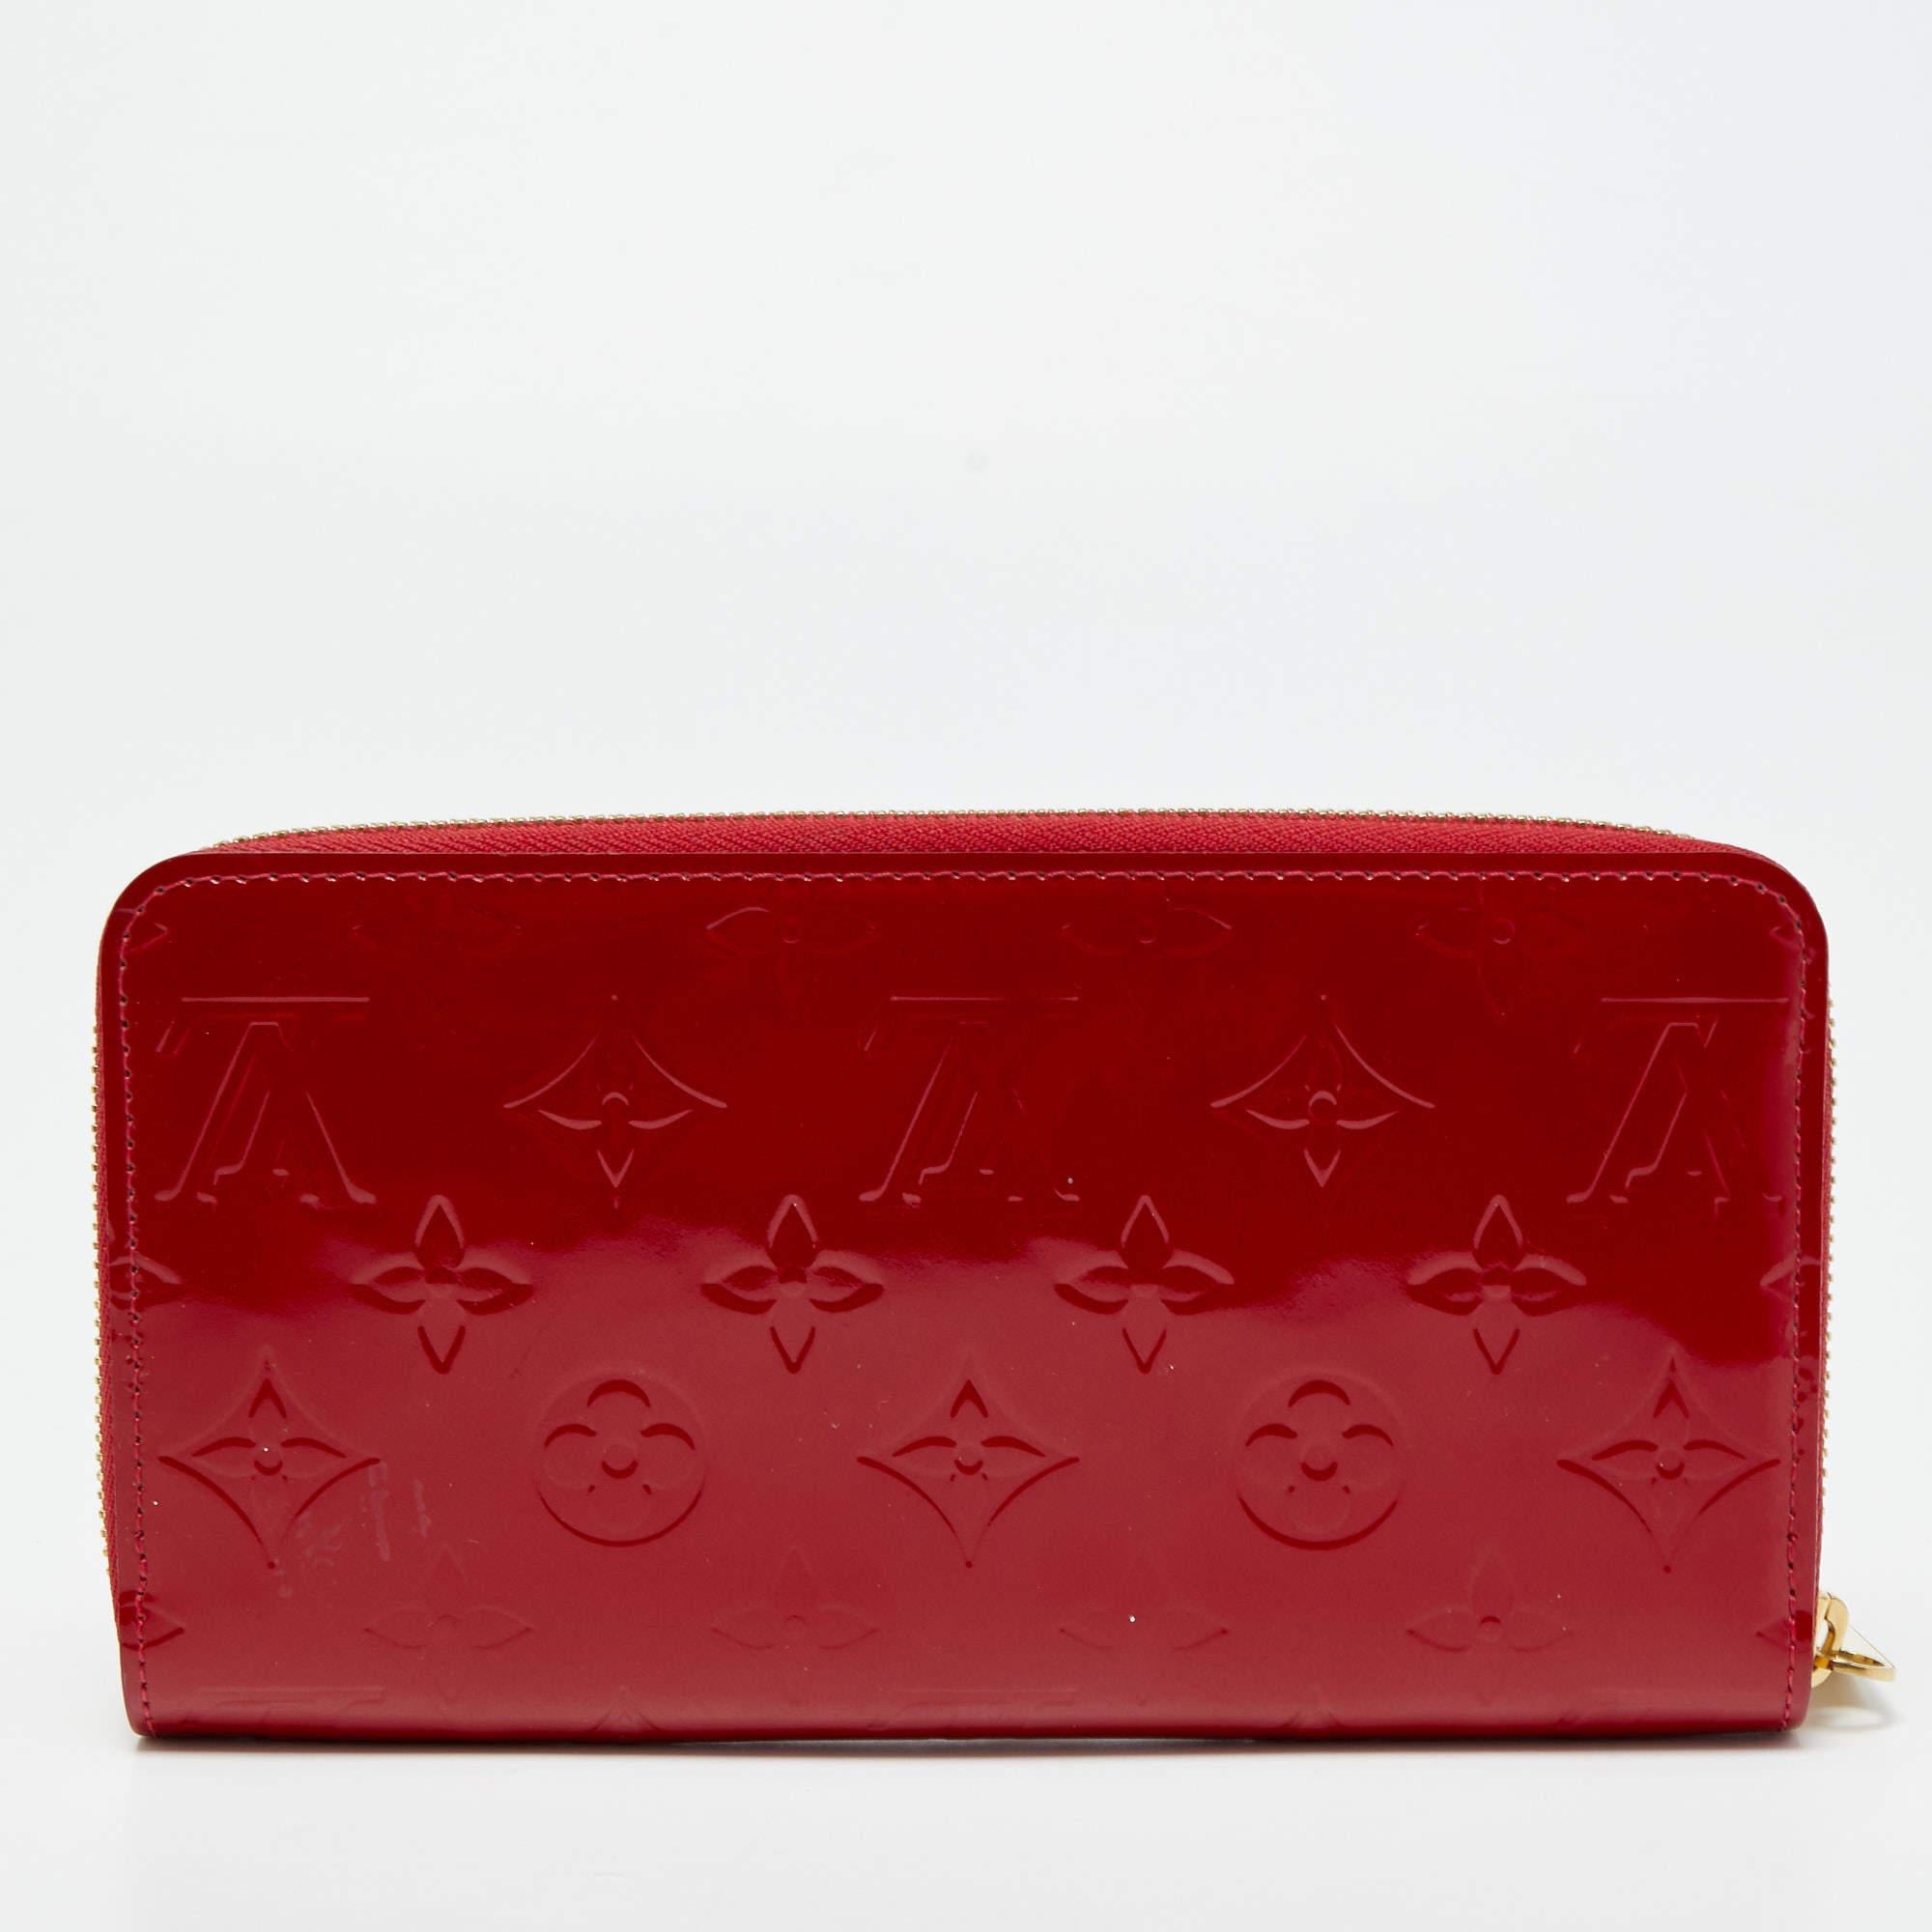 Known for its impeccable creations, Louis Vuitton is synonymous with luxury and durability. This Zippy wallet is conveniently designed for everyday use. Crafted from Pomme D’amour Monogram Vernis, it is paired with a zip-around closure and a brand